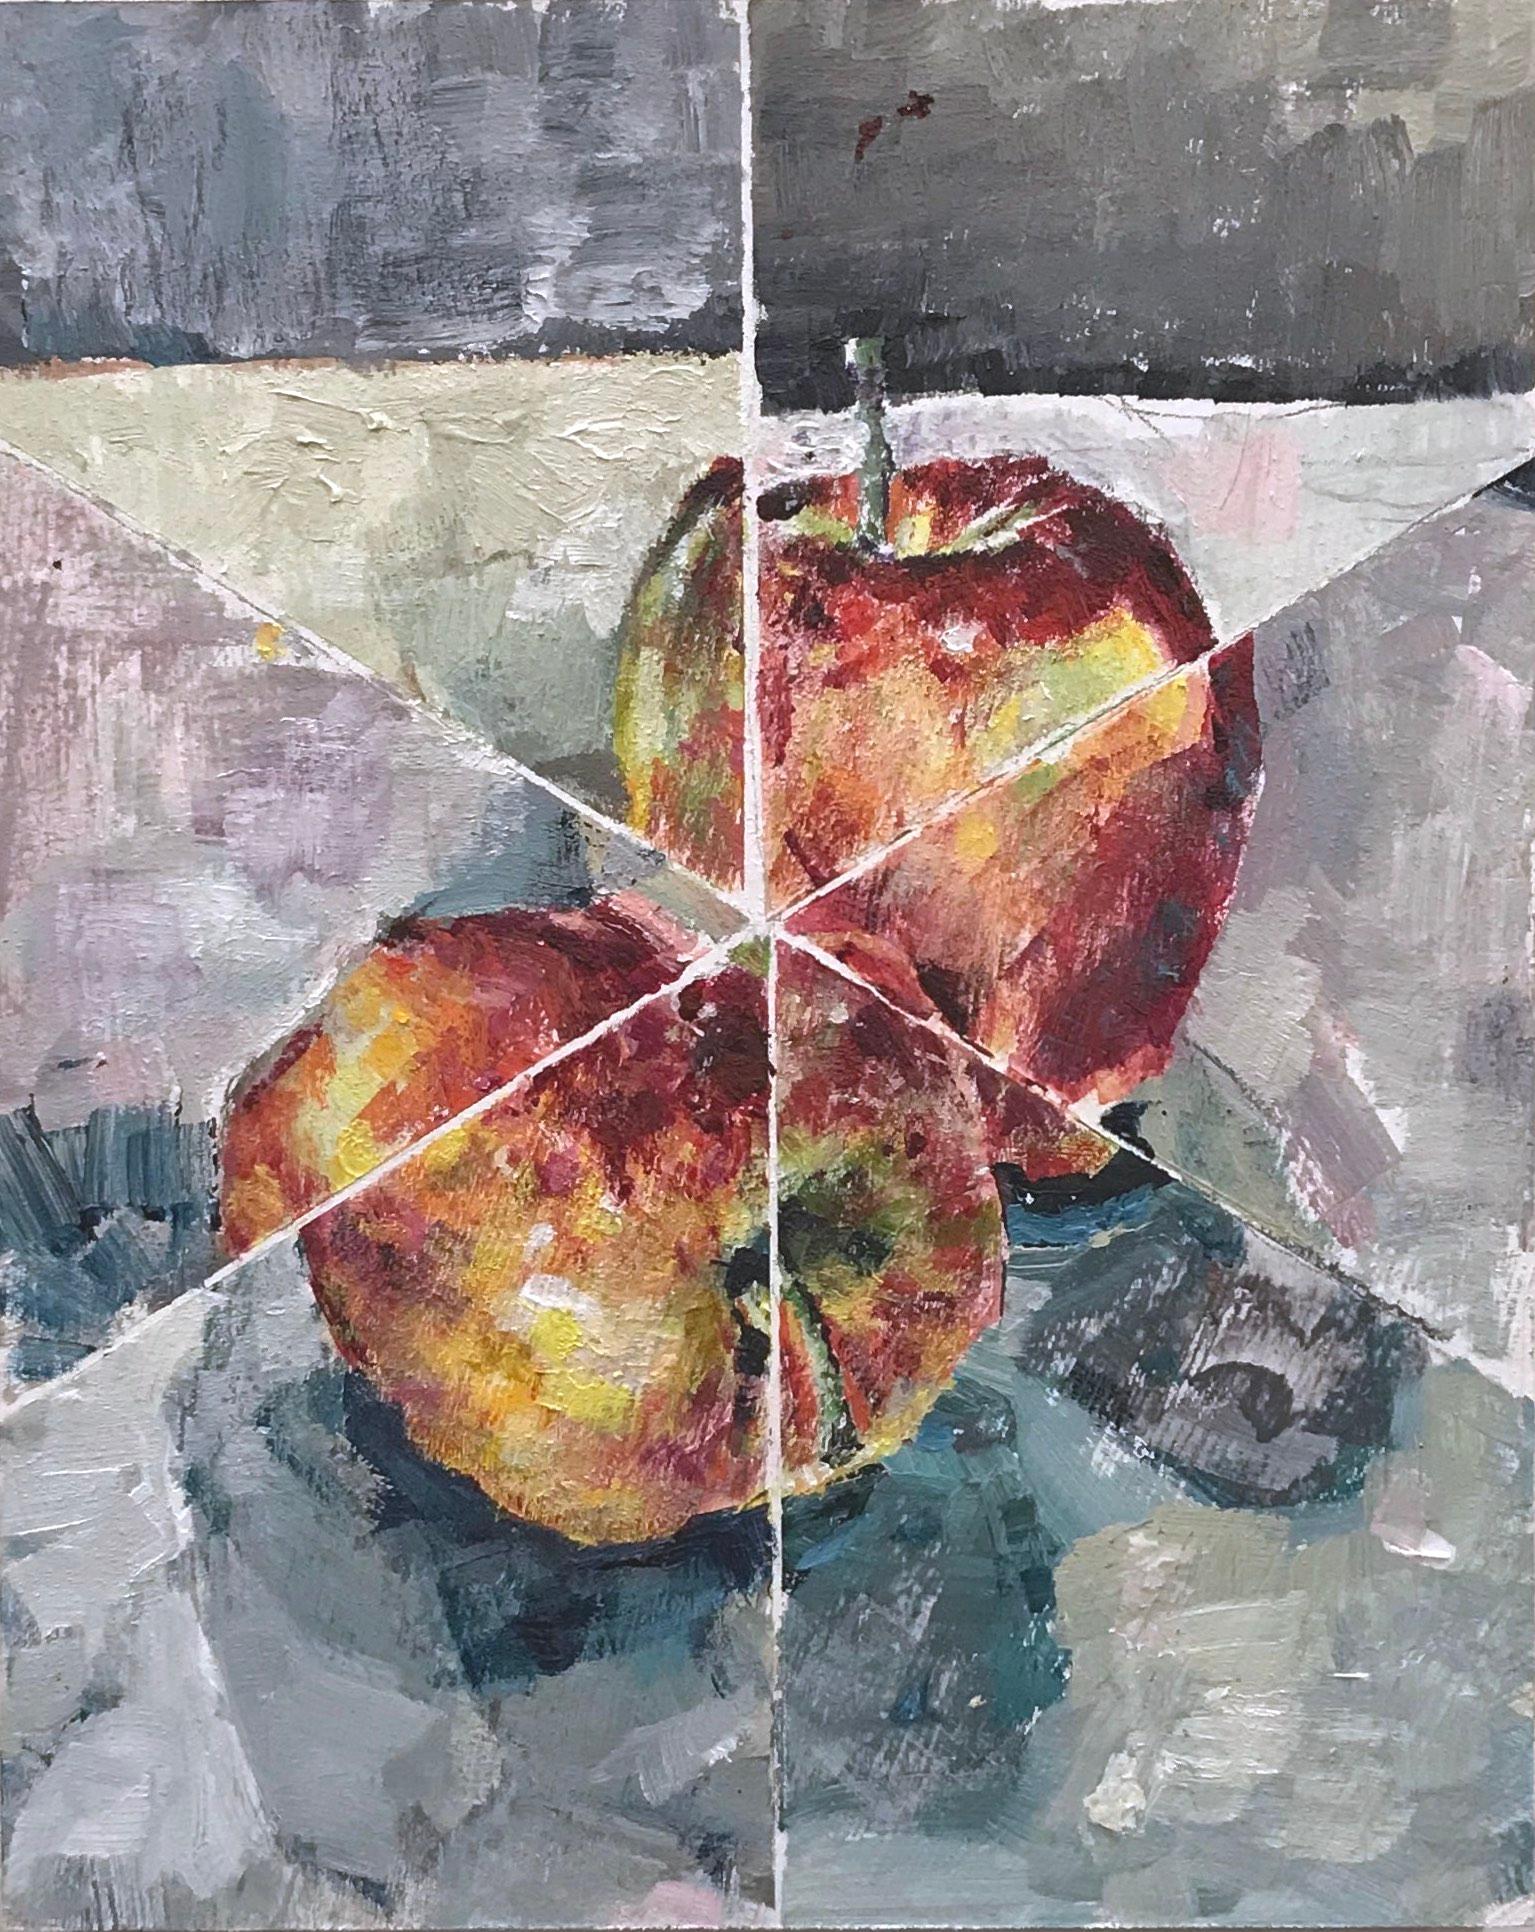 Two Apples: abstract still life interior painting of red apples on pink & gray